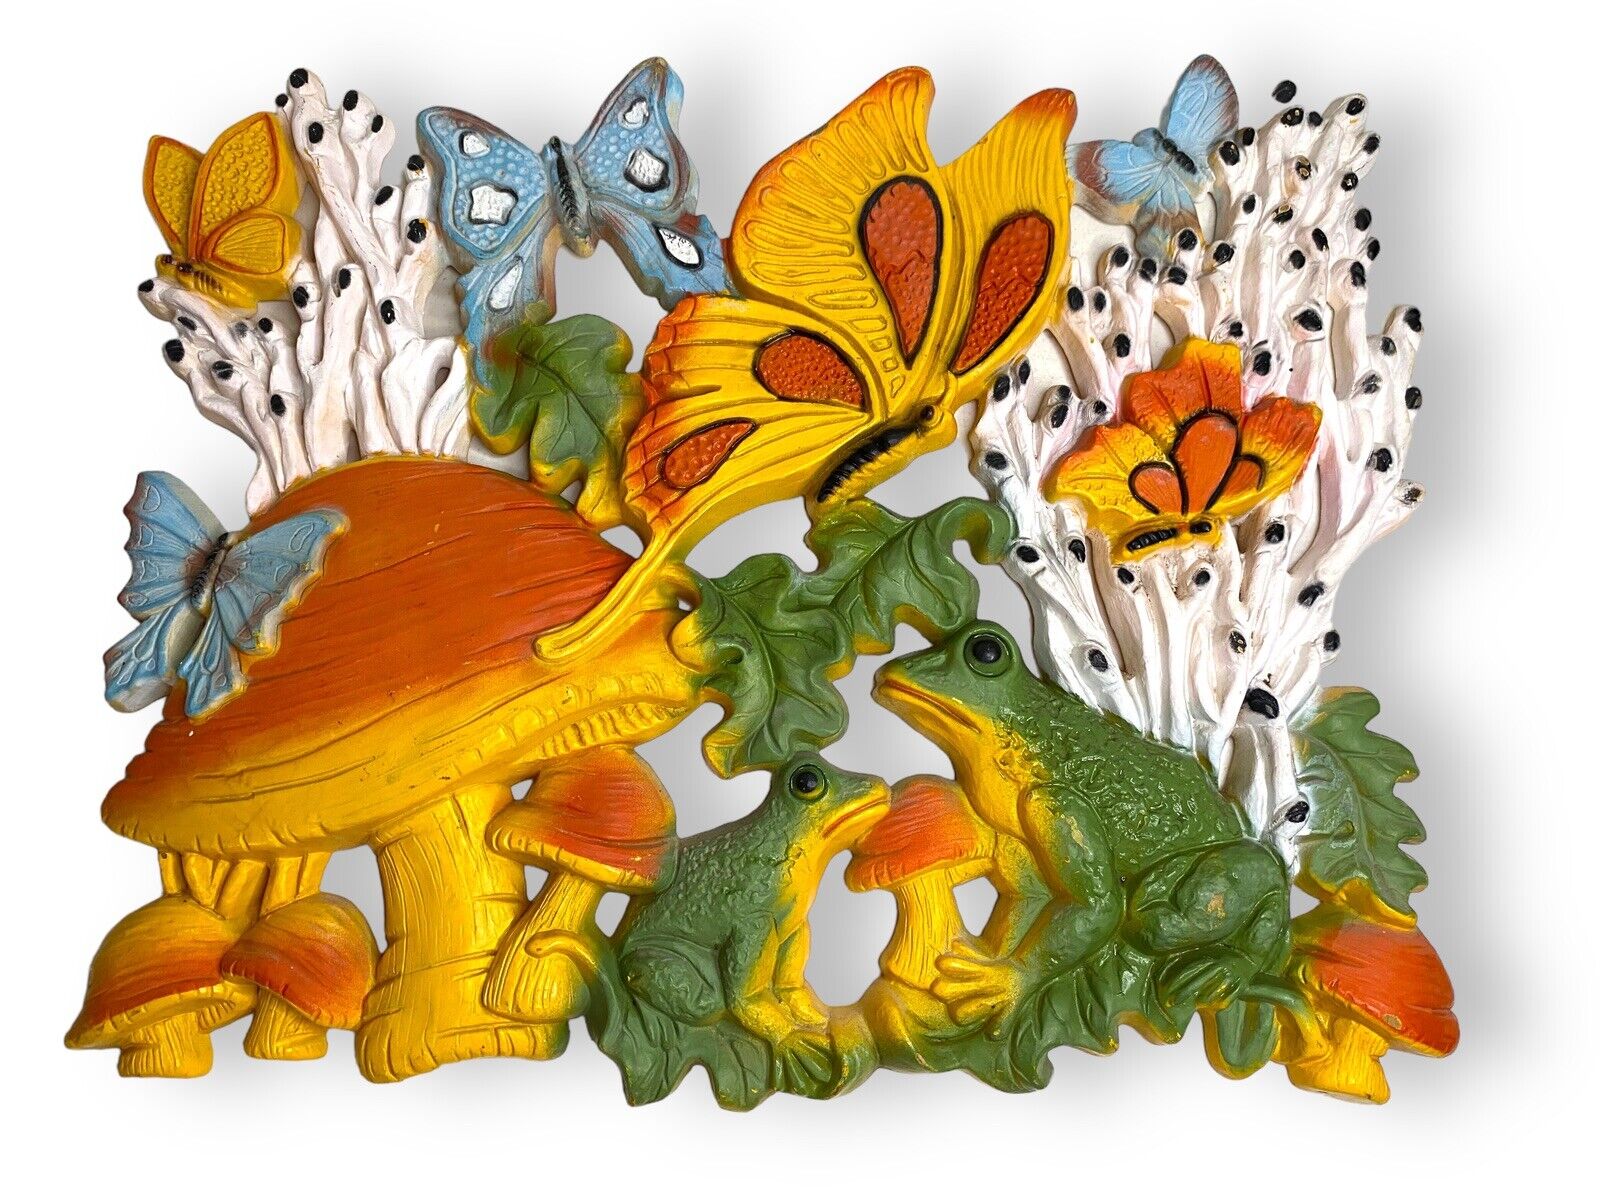 Vintage 1970s Homeco Wall Decor With Mushrooms, Butterflies And Frogs